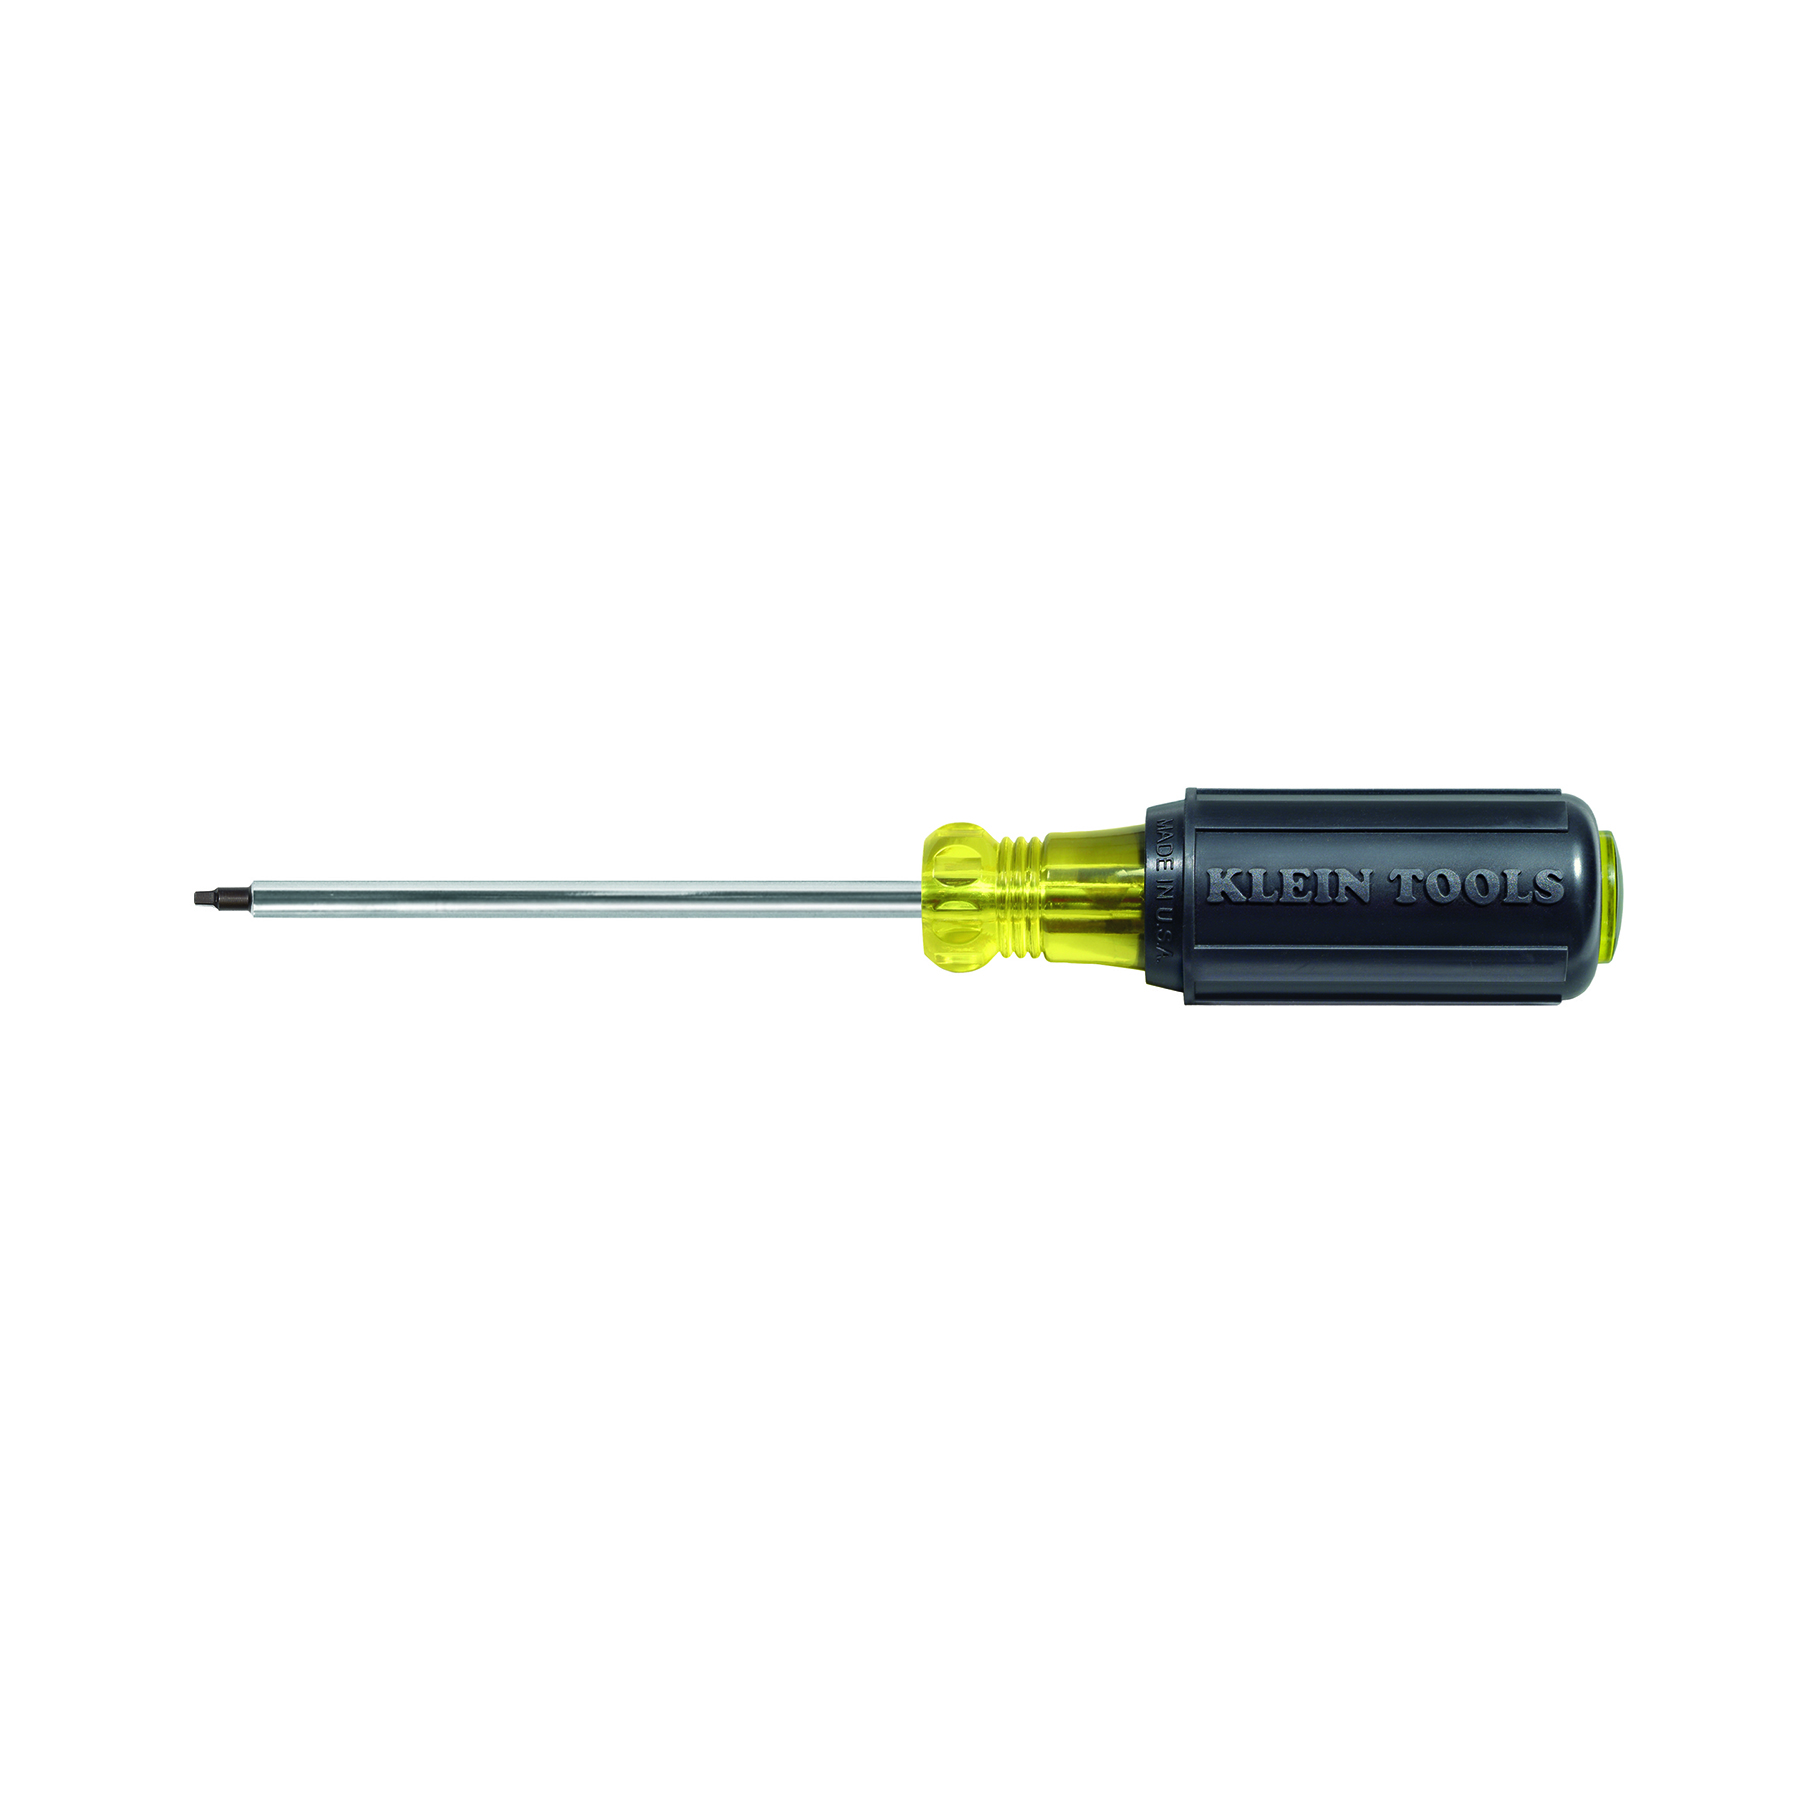 Screwdriver, #1 Square Recess Tip, 4-Inch Shank - 661 | Klein Tools - For  Professionals since 1857